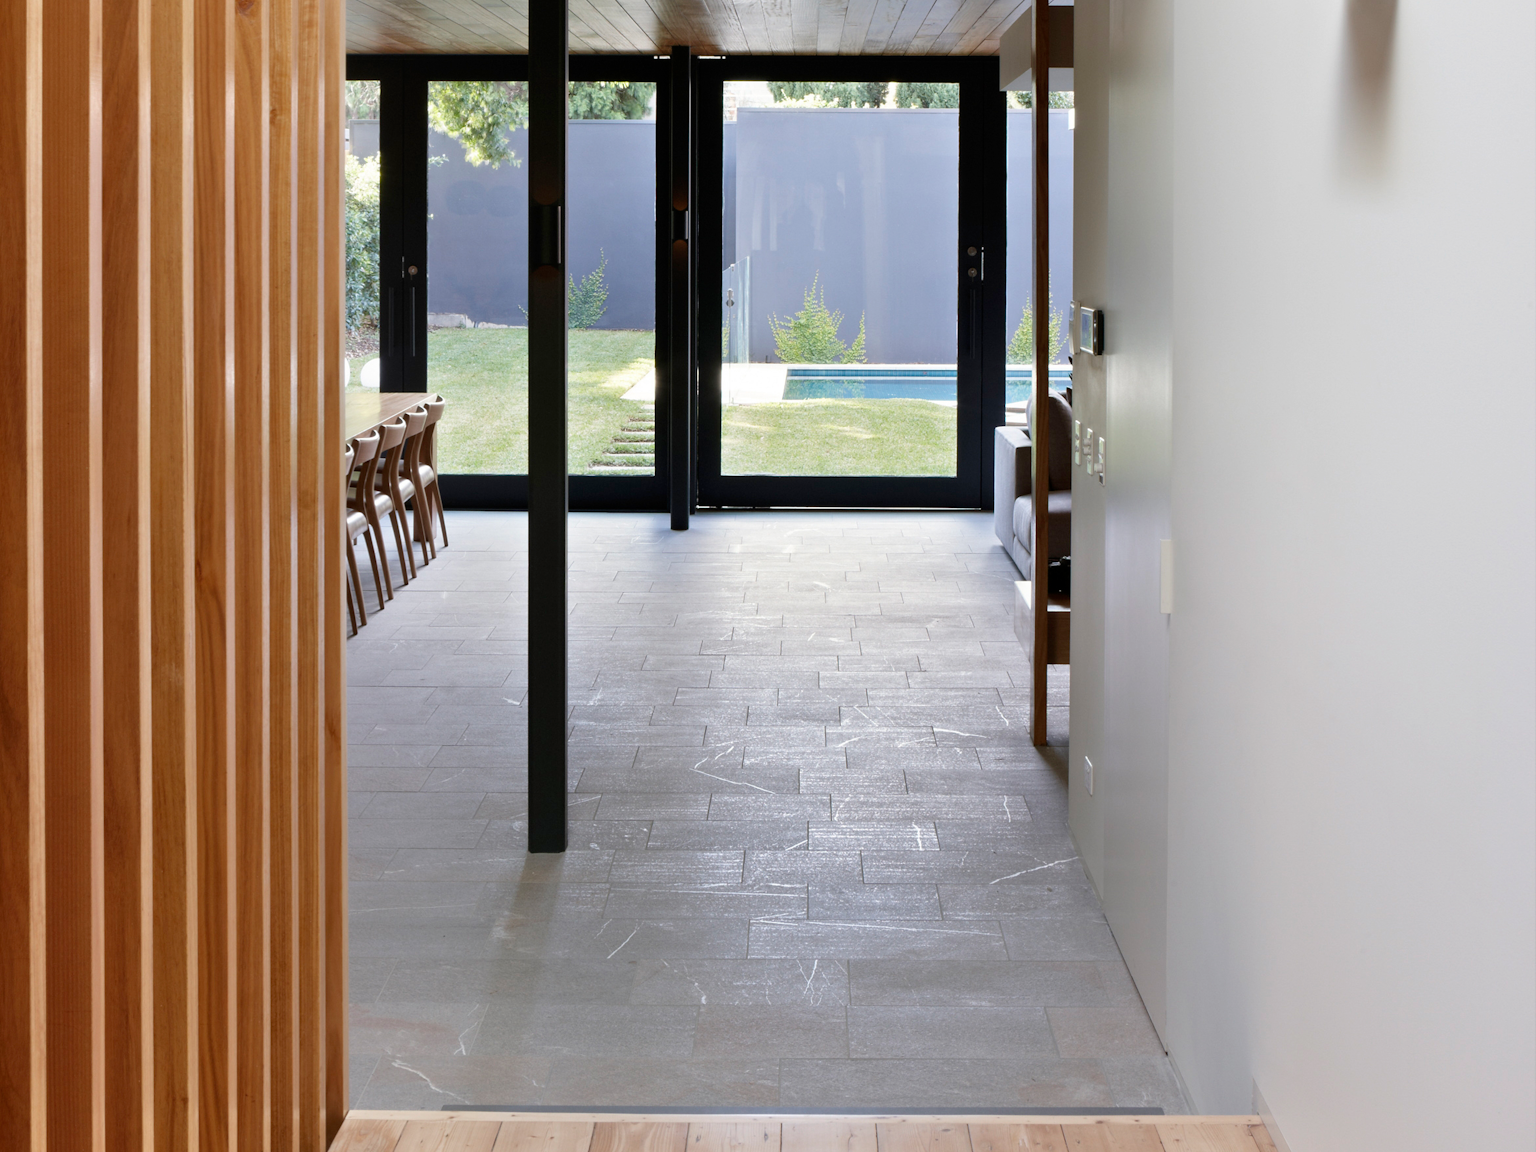 View from internal corridor towards garden showing Lagano granite paving in the living room